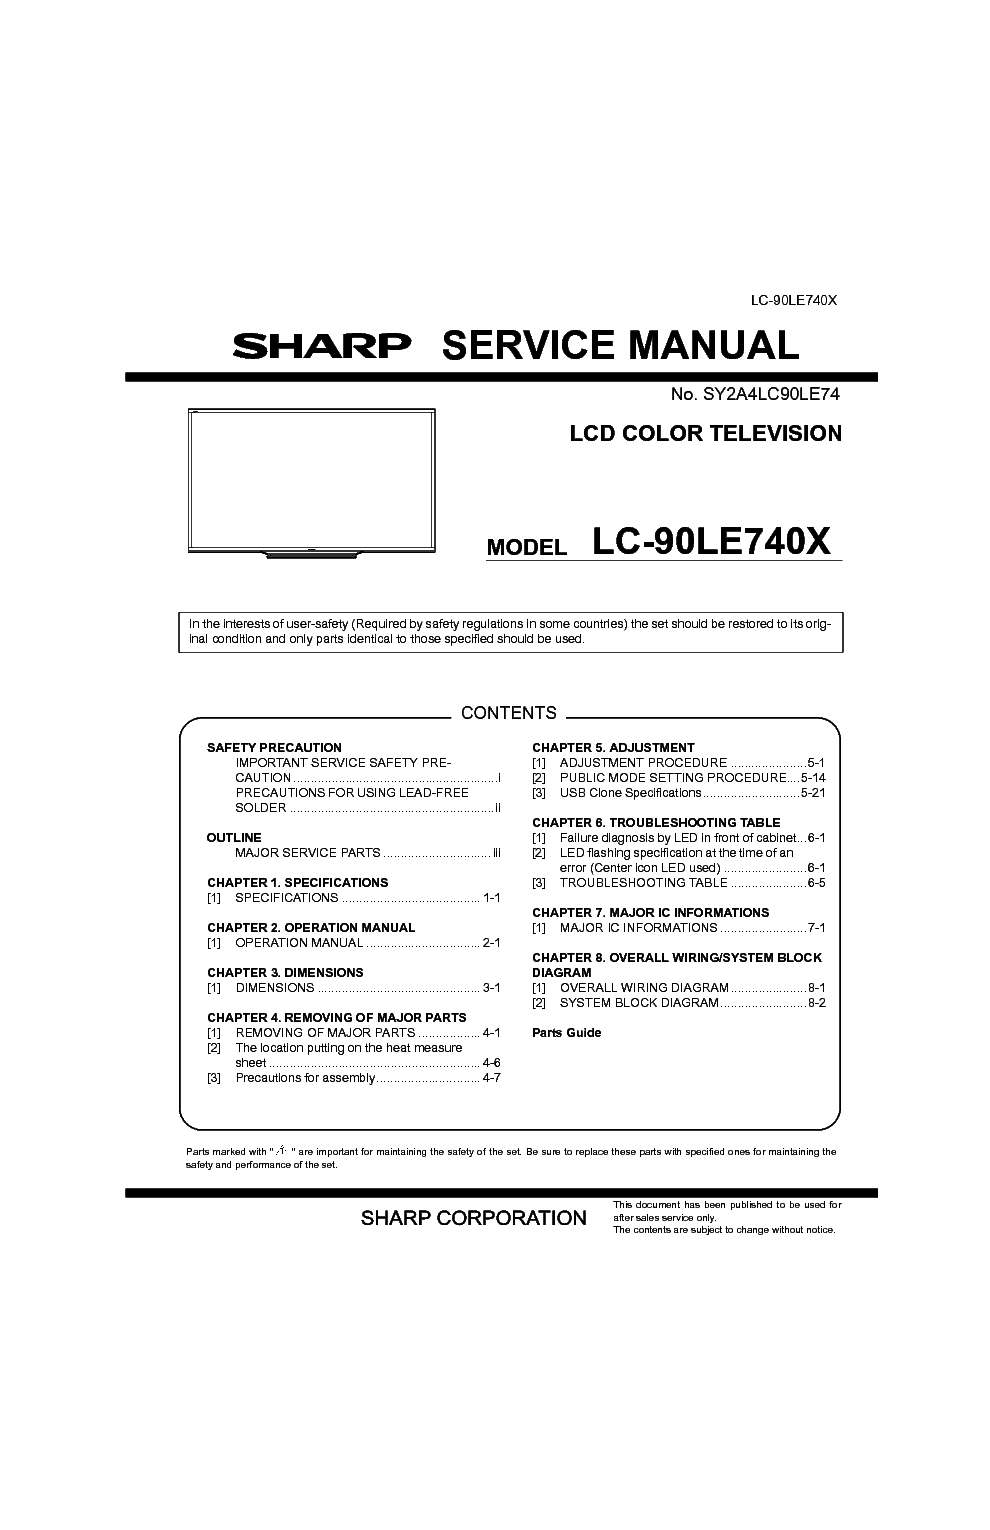 SHARP LC-90LE740X service manual (1st page)